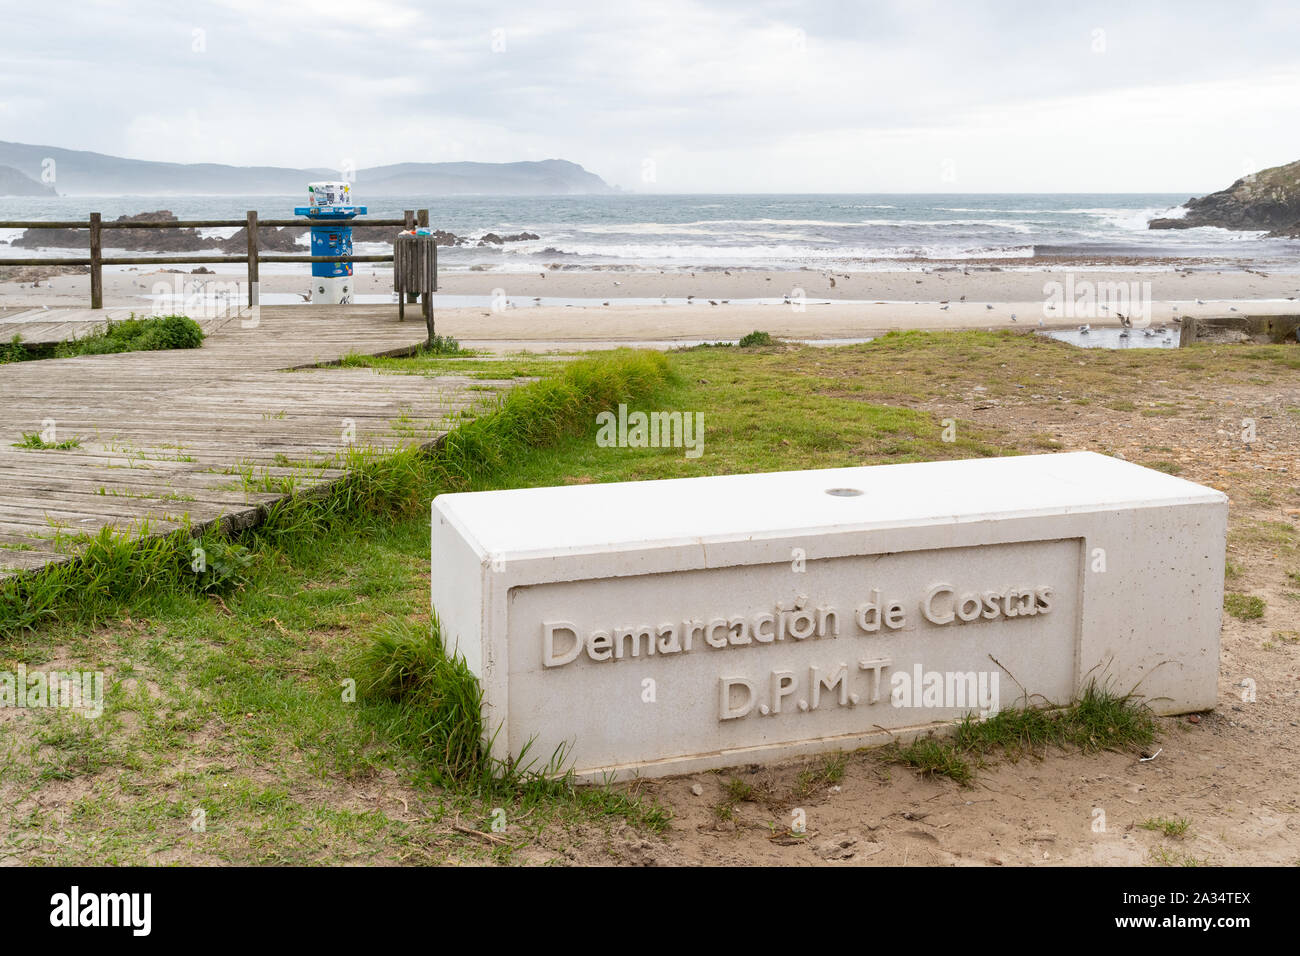 Nemina Beach, Galicia, Spain - parking and camping restrictions enforced by concrete block marked Demarcacion de Costas under Spanish coastal law 1988 Stock Photo